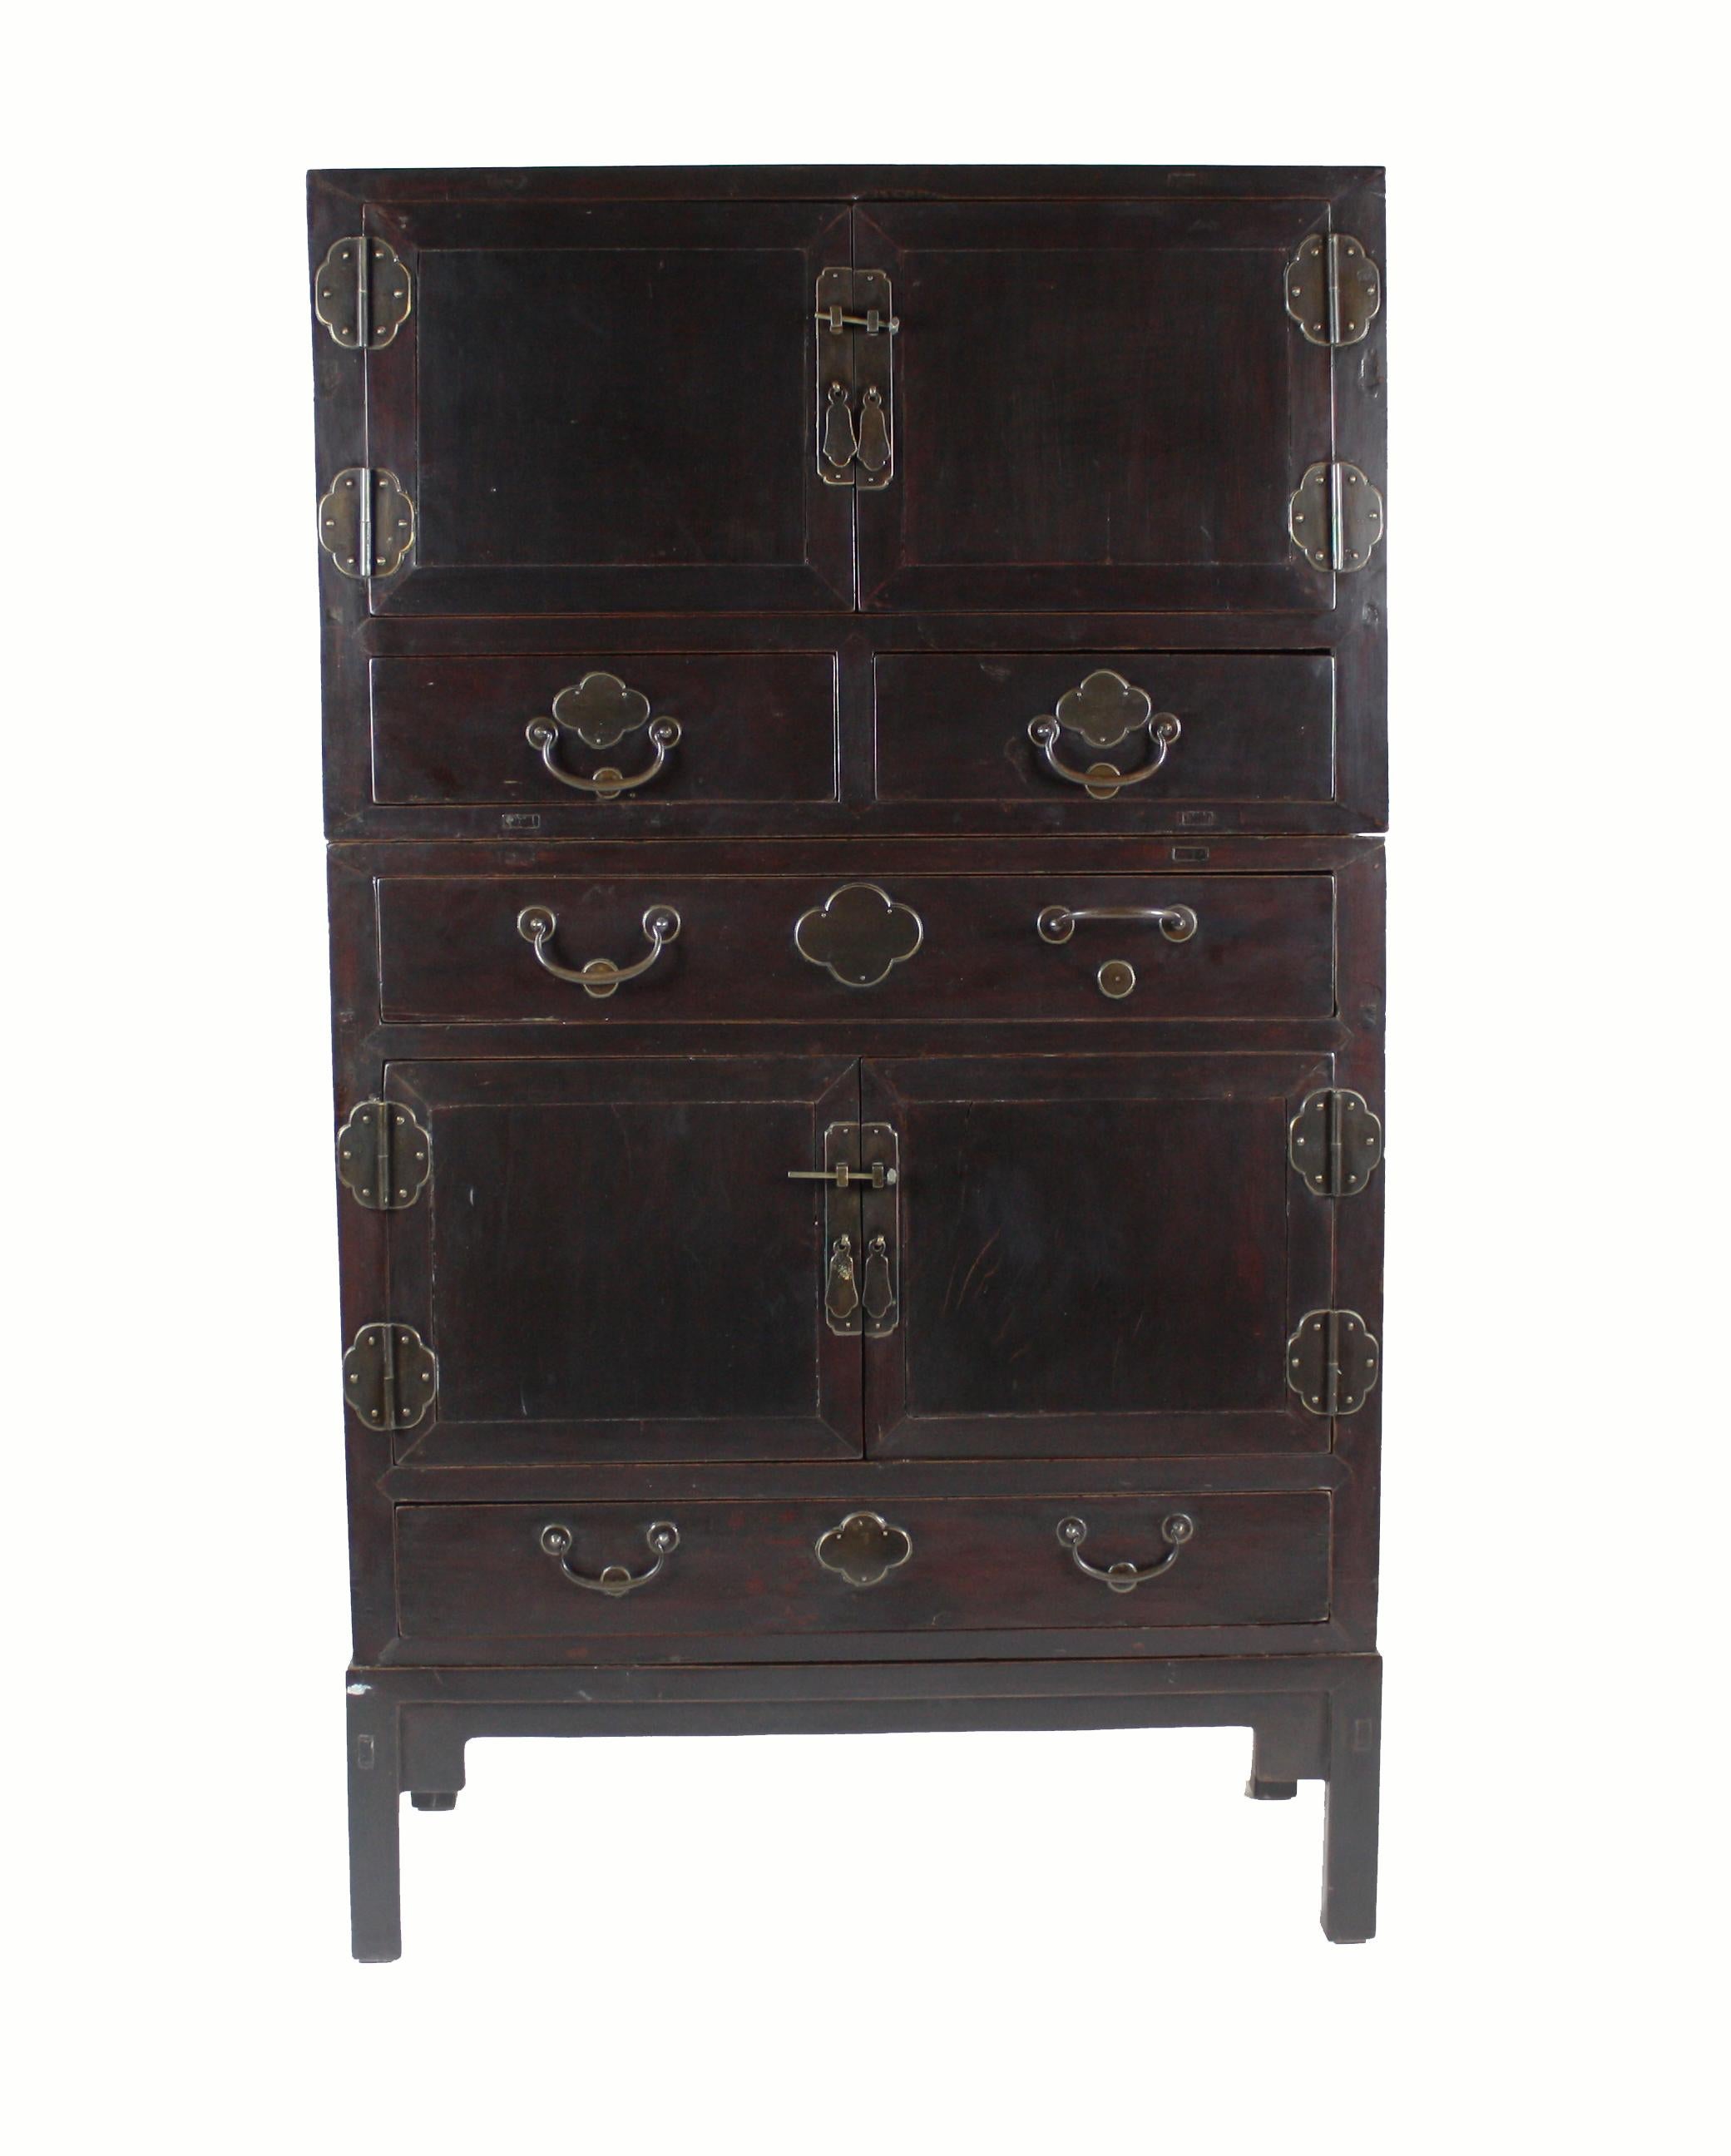 This antique Chinese cabinet consists of two separate cabinets and one stand that can be modified to fit space restrictions. Use it as one tall cabinet or two smaller cabinets, without the stand, or one cabinet with stand. The top cabinet has one